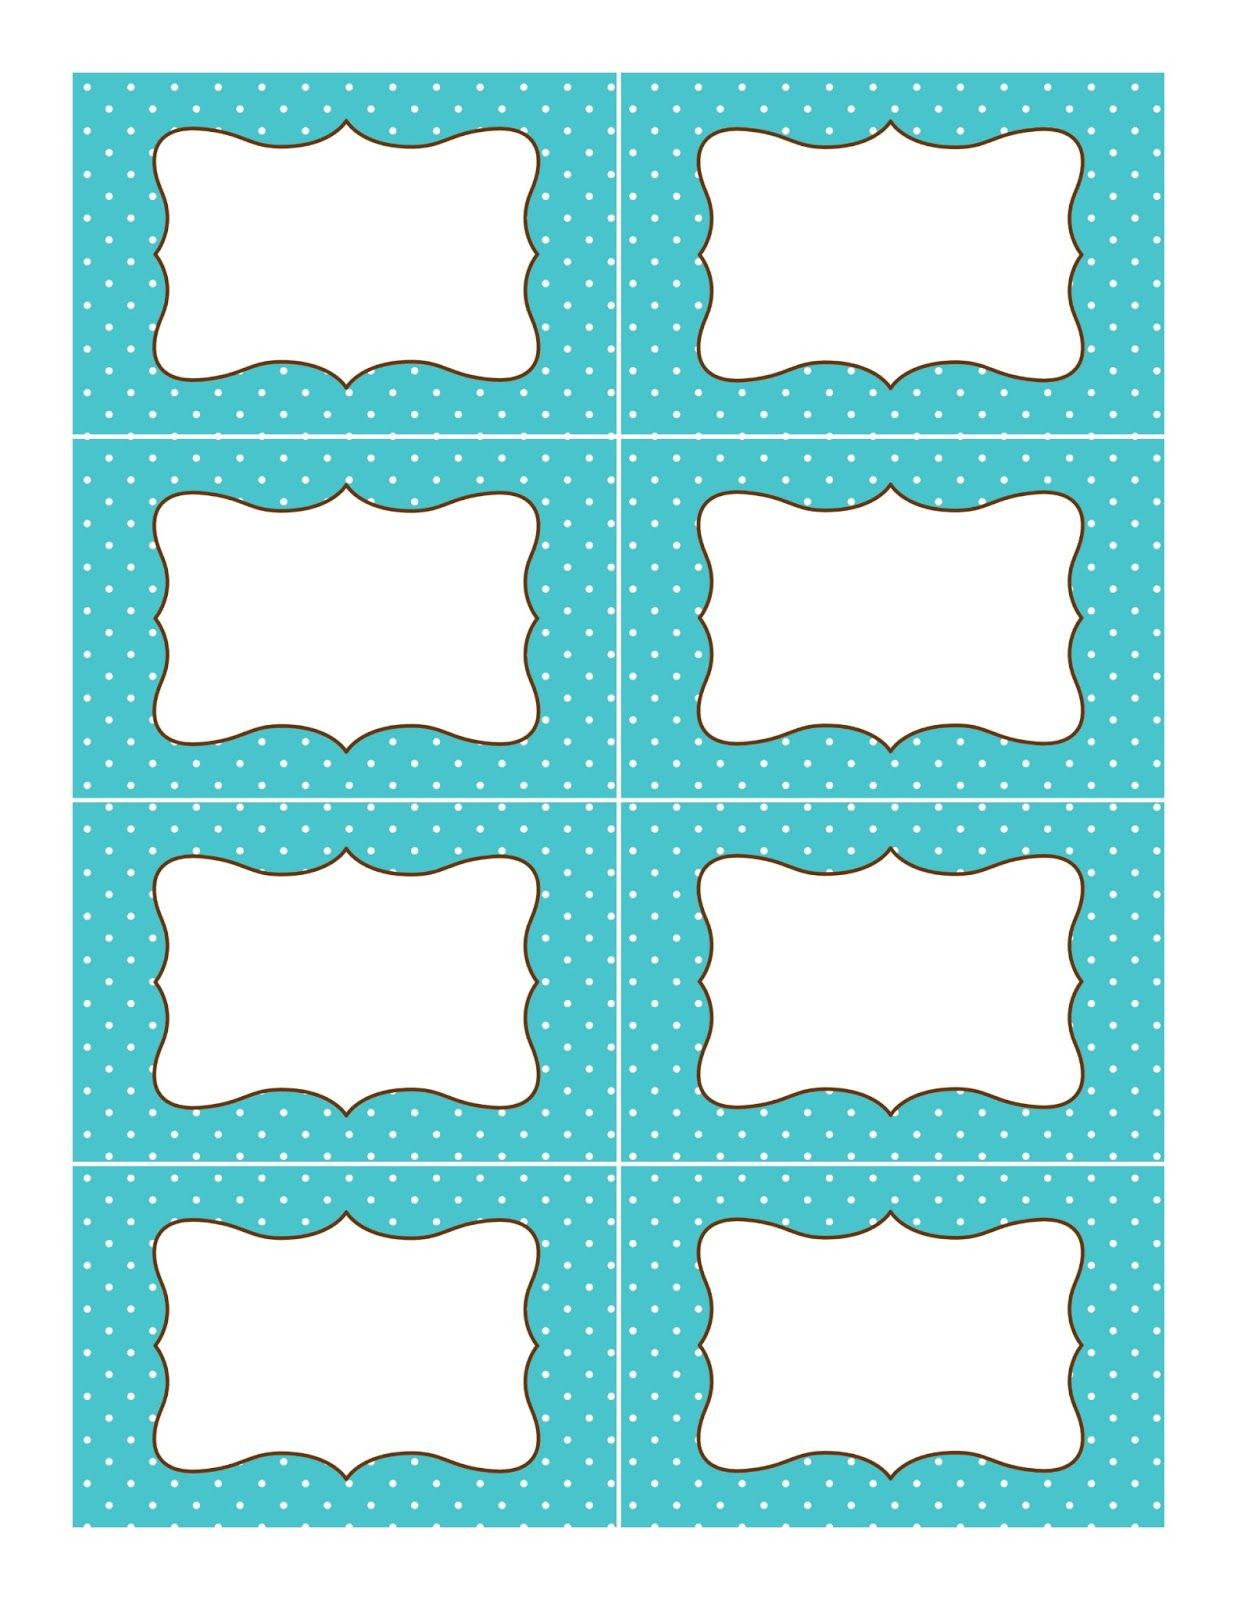 Candy Buffet Supplies: Free Printable Labels | Organization - Free Editable Printable Labels